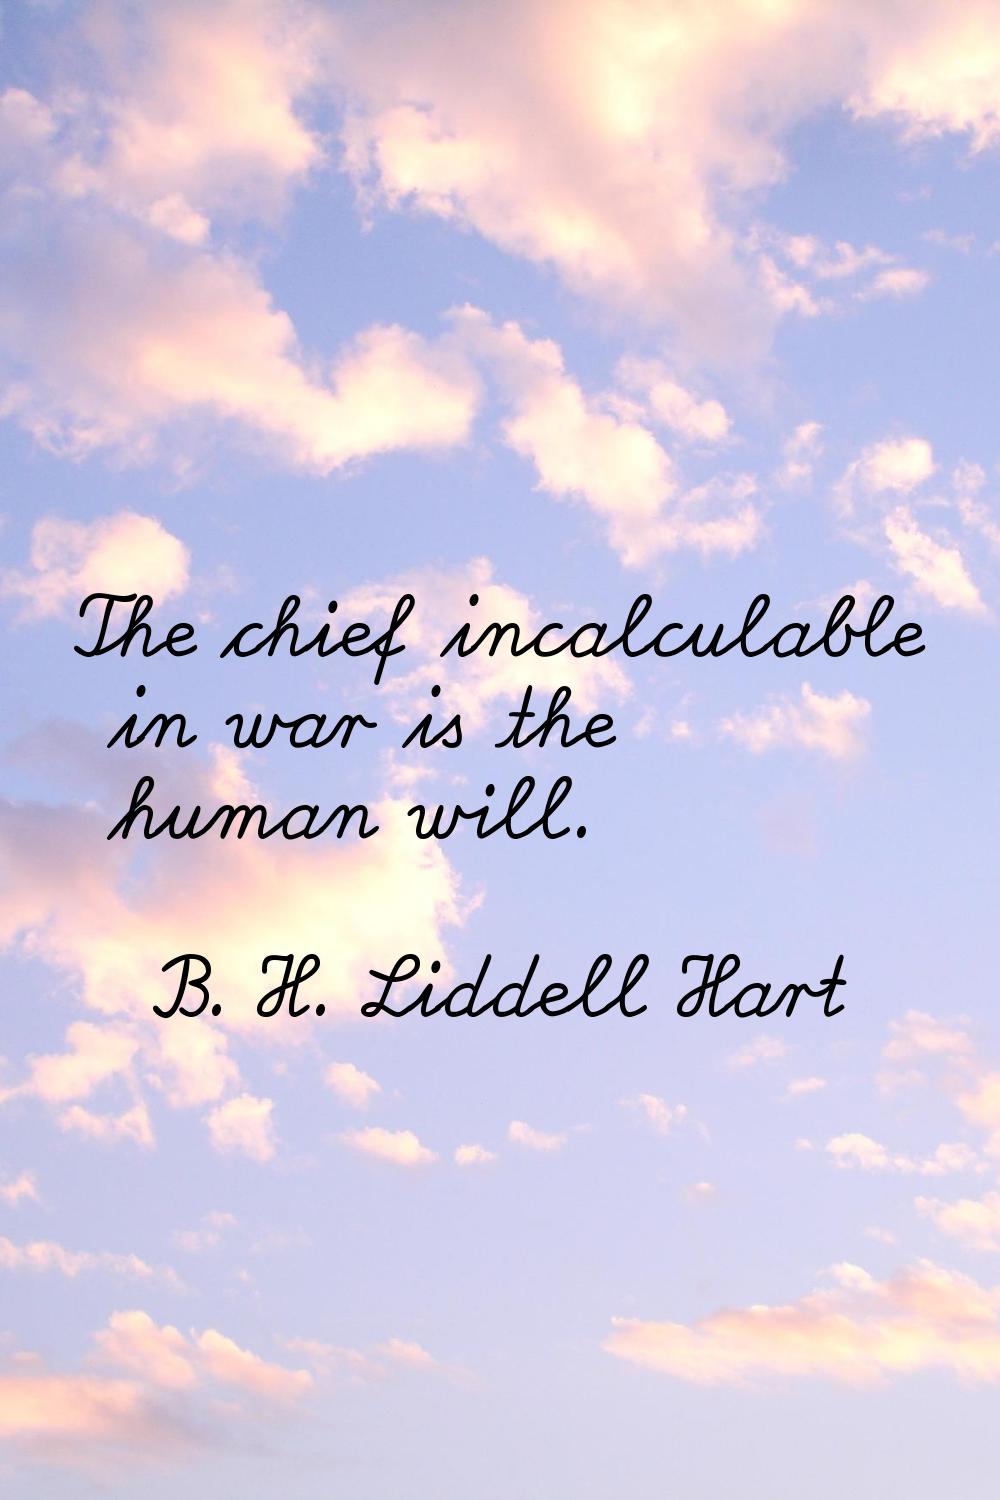 The chief incalculable in war is the human will.